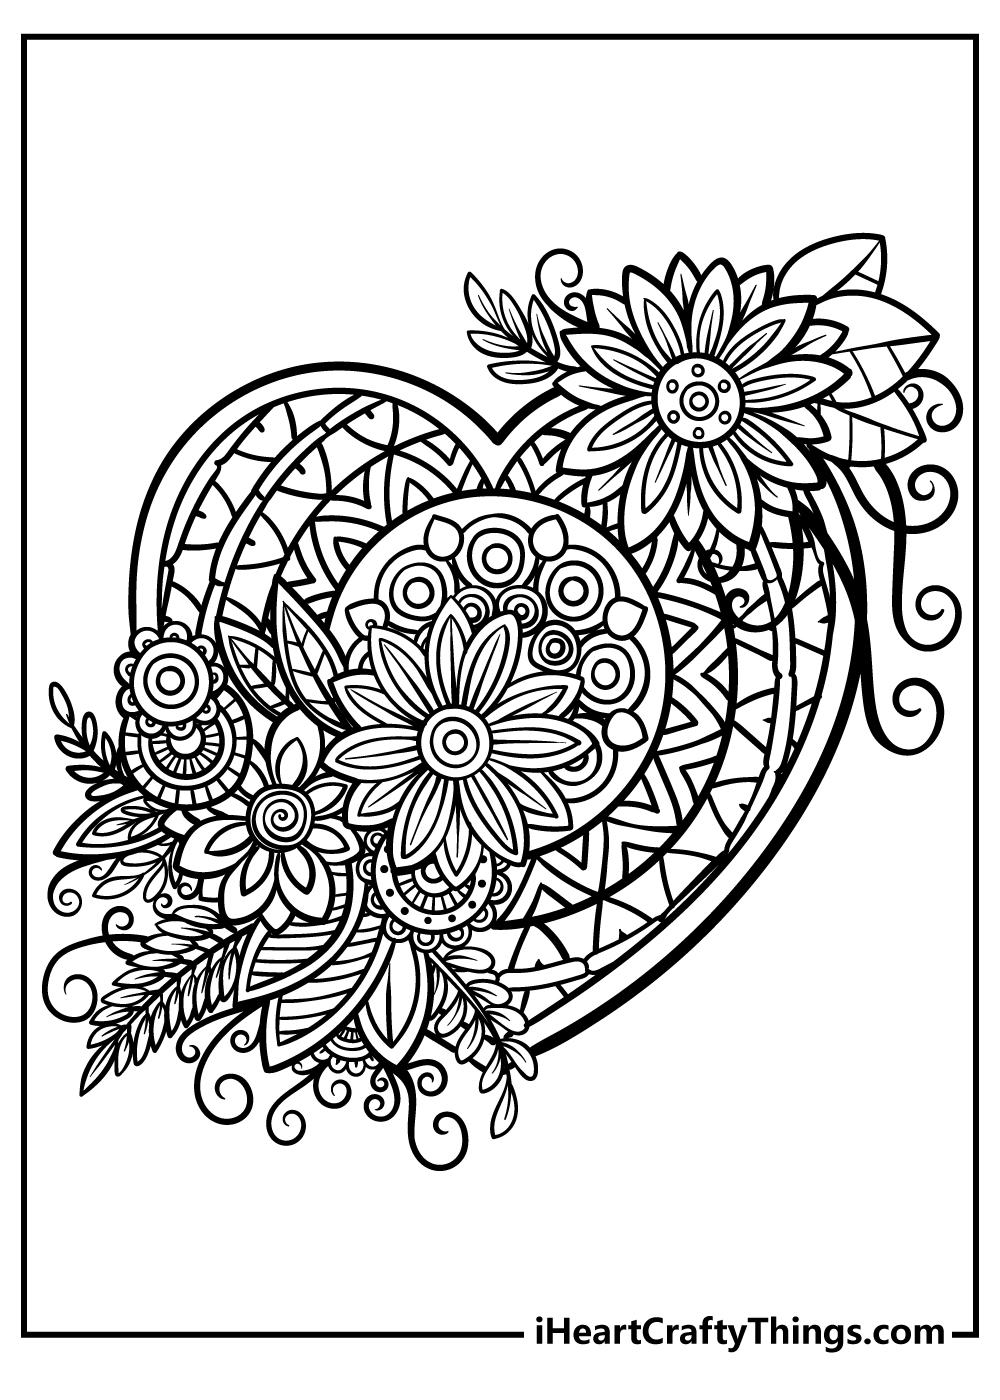 Adult Coloring Pages printable